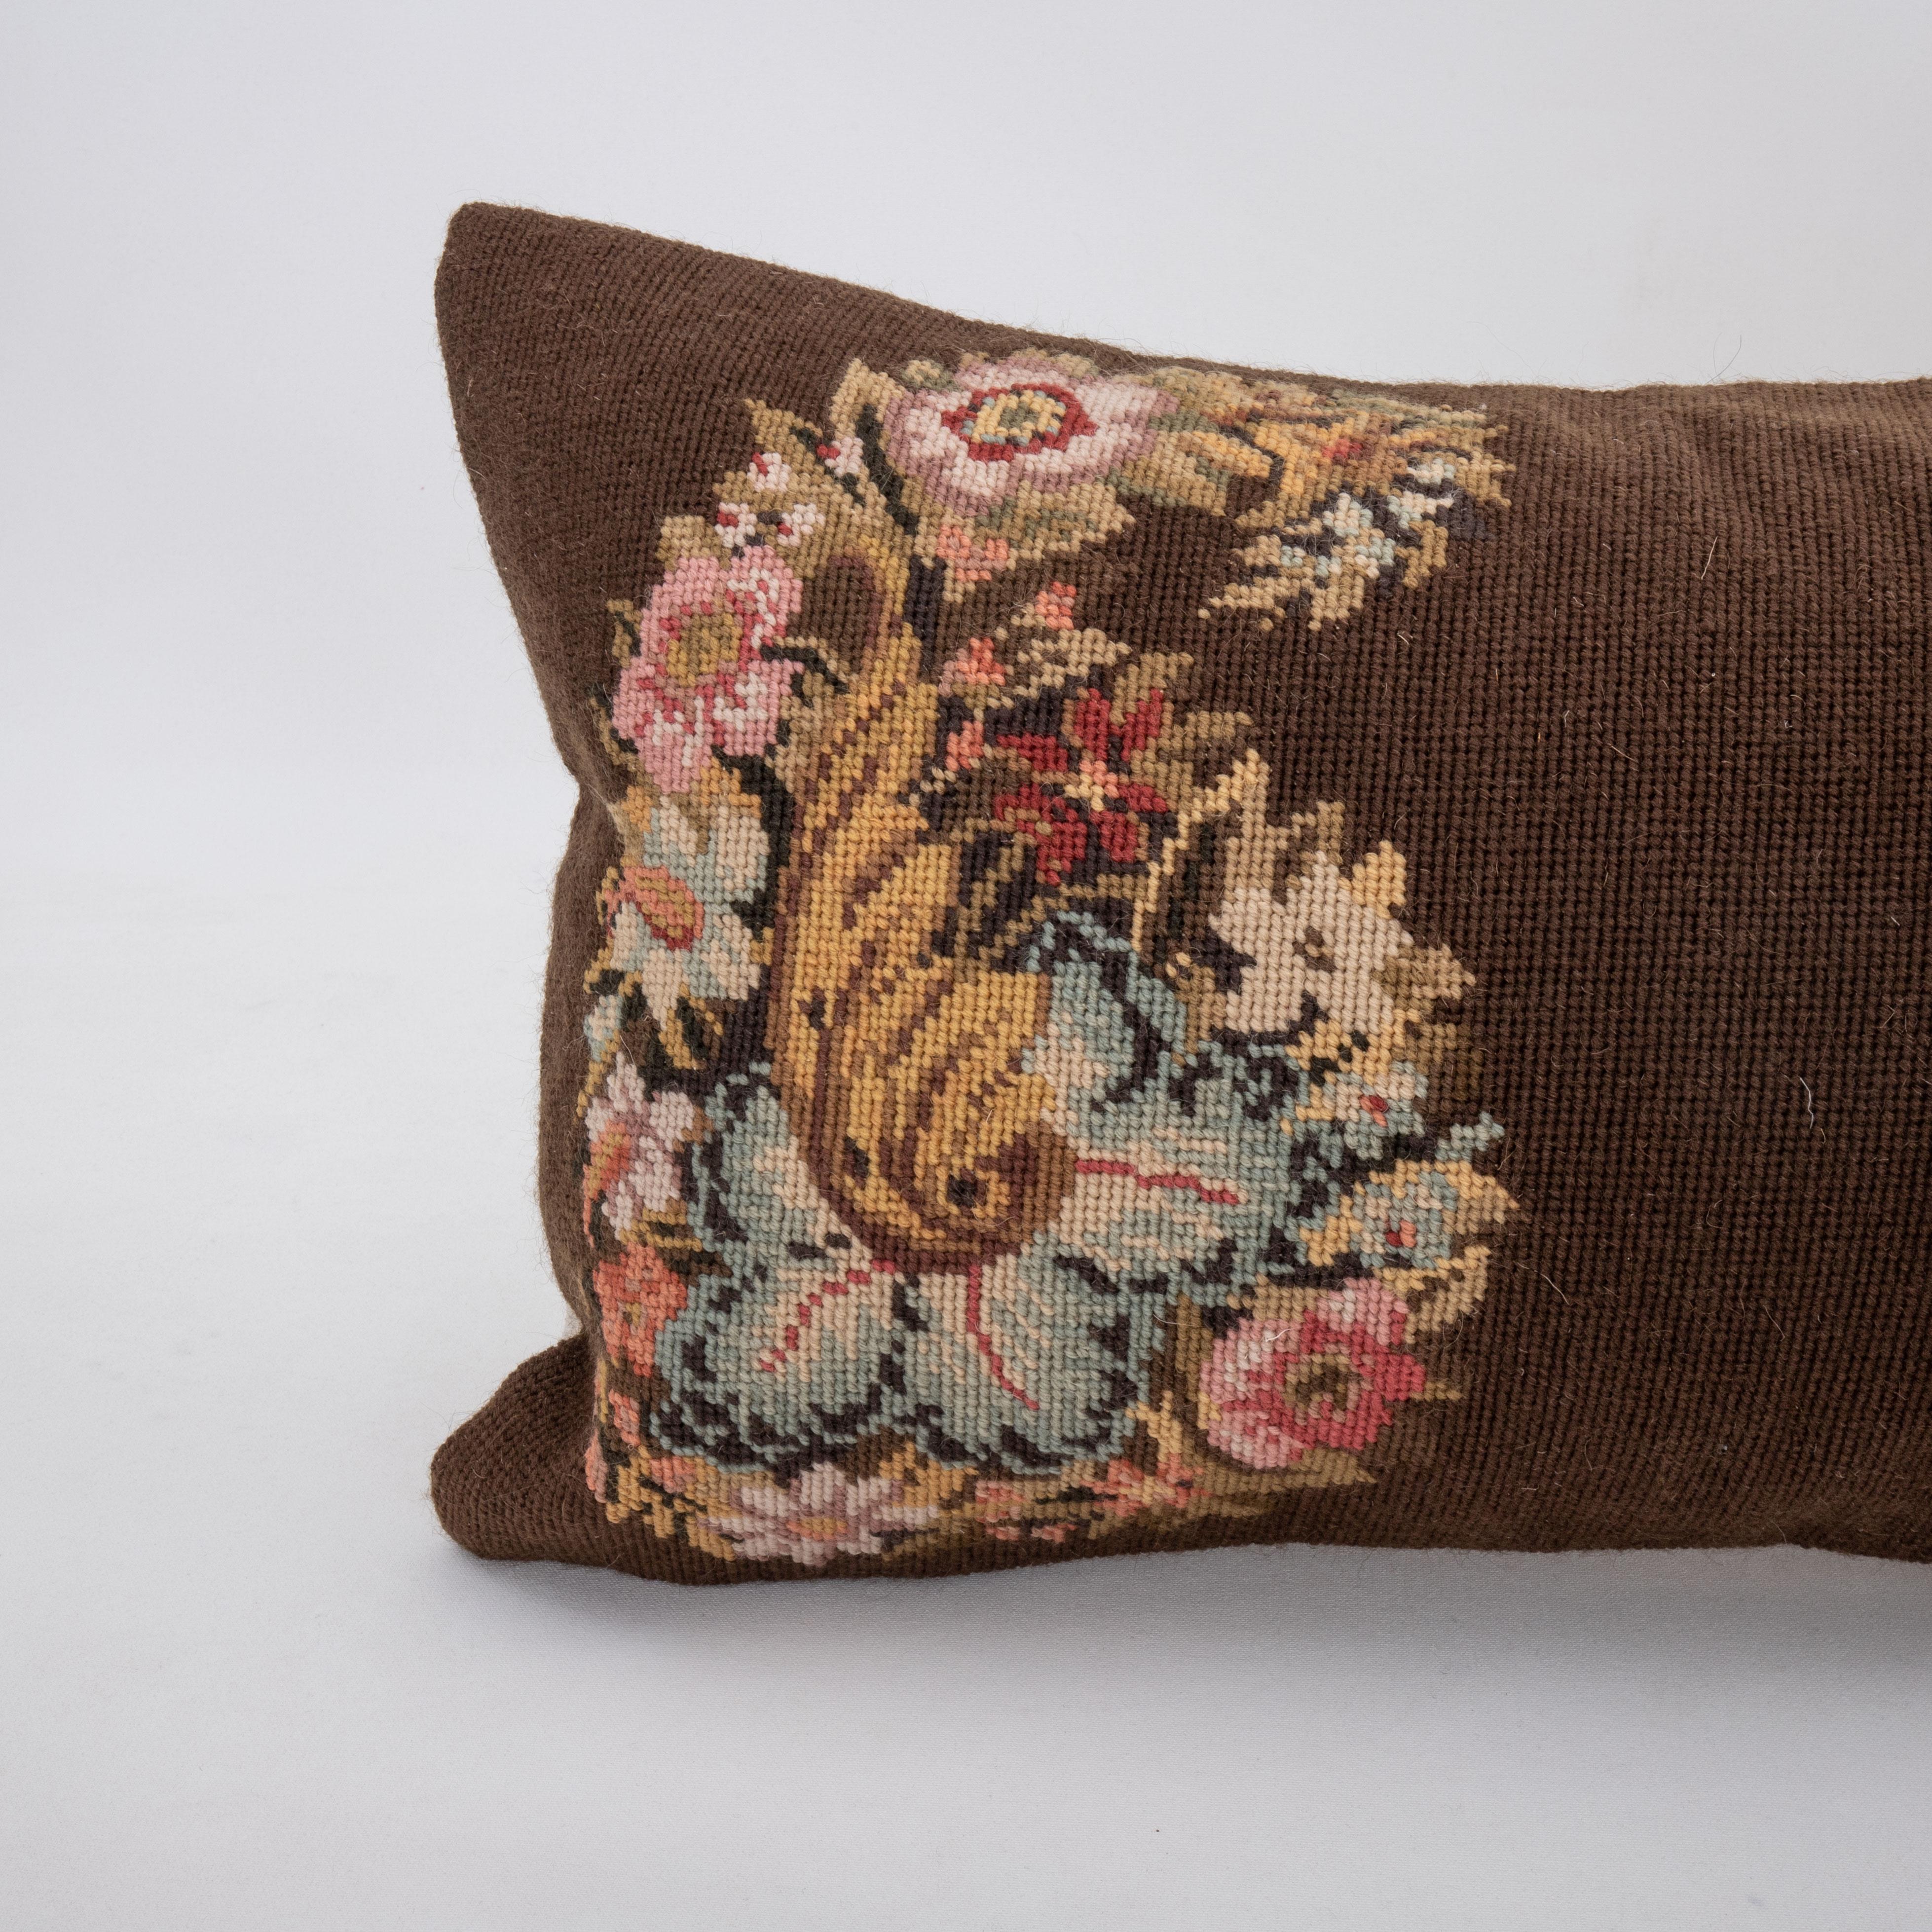 English Pillow Case Made from a European Embroidery, E 20th C. For Sale